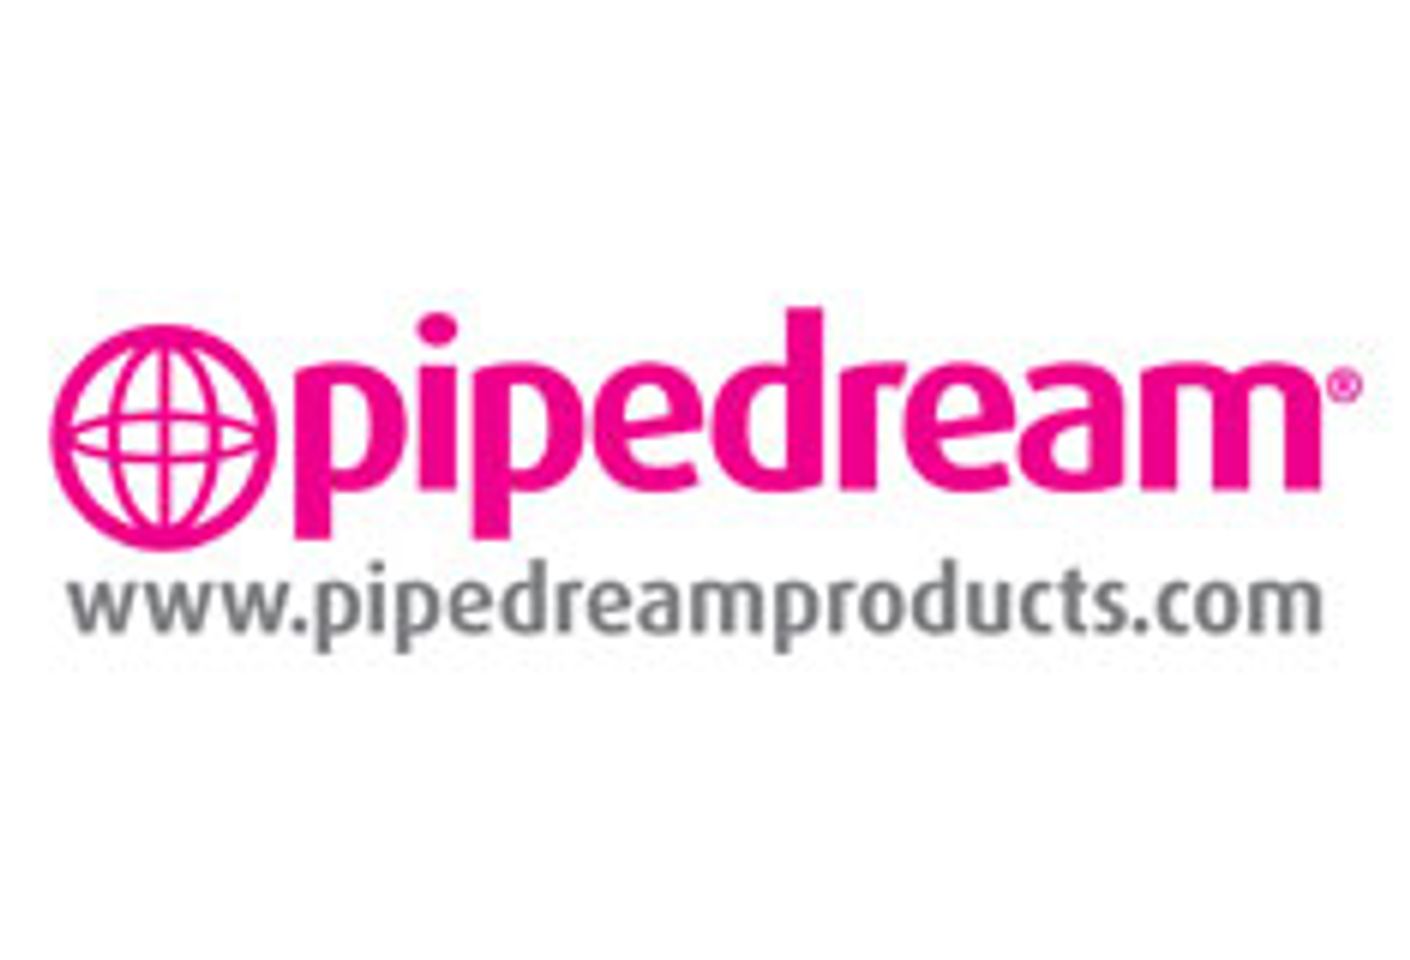 Pipedream Begins Shipping the Award-Winning Mia Isabella's Big Secret Collection